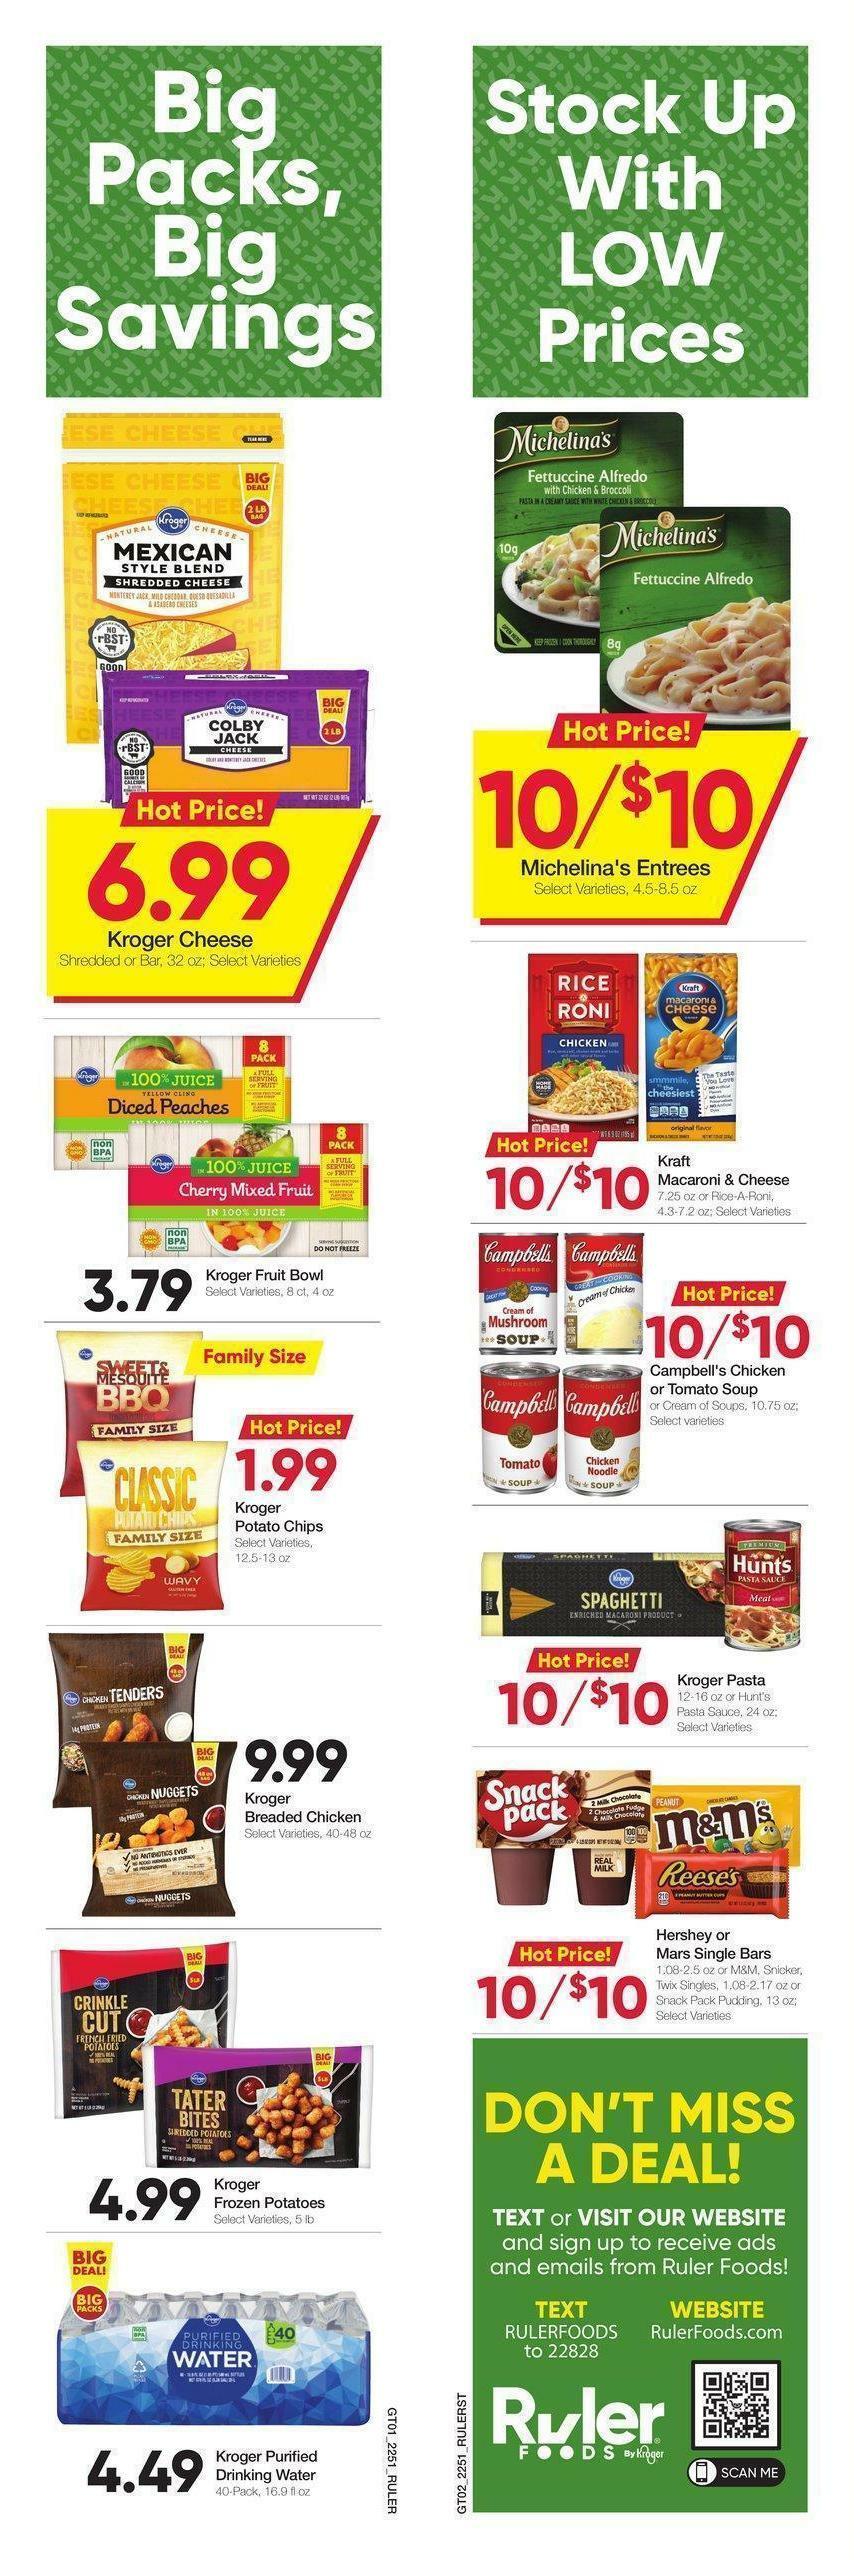 Ruler Foods Weekly Ad from January 18